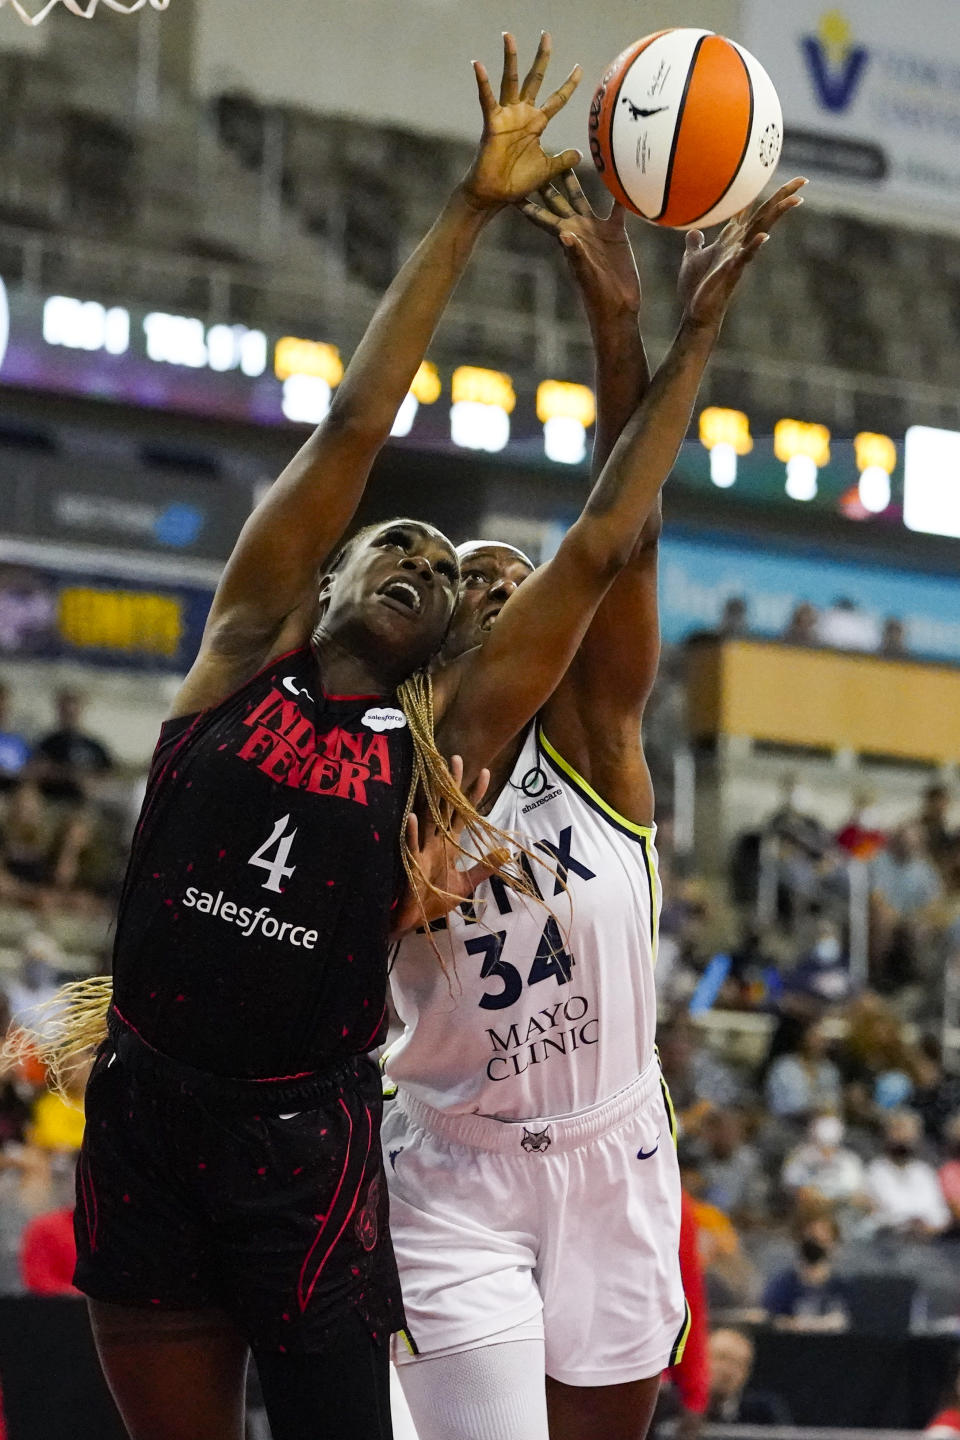 Indiana Fever center Queen Egbo (4) and Minnesota Lynx center Sylvia Fowles (34) go for a rebound in the first half of a WNBA basketball game in Indianapolis, Friday, July 15, 2022. (AP Photo/Michael Conroy)